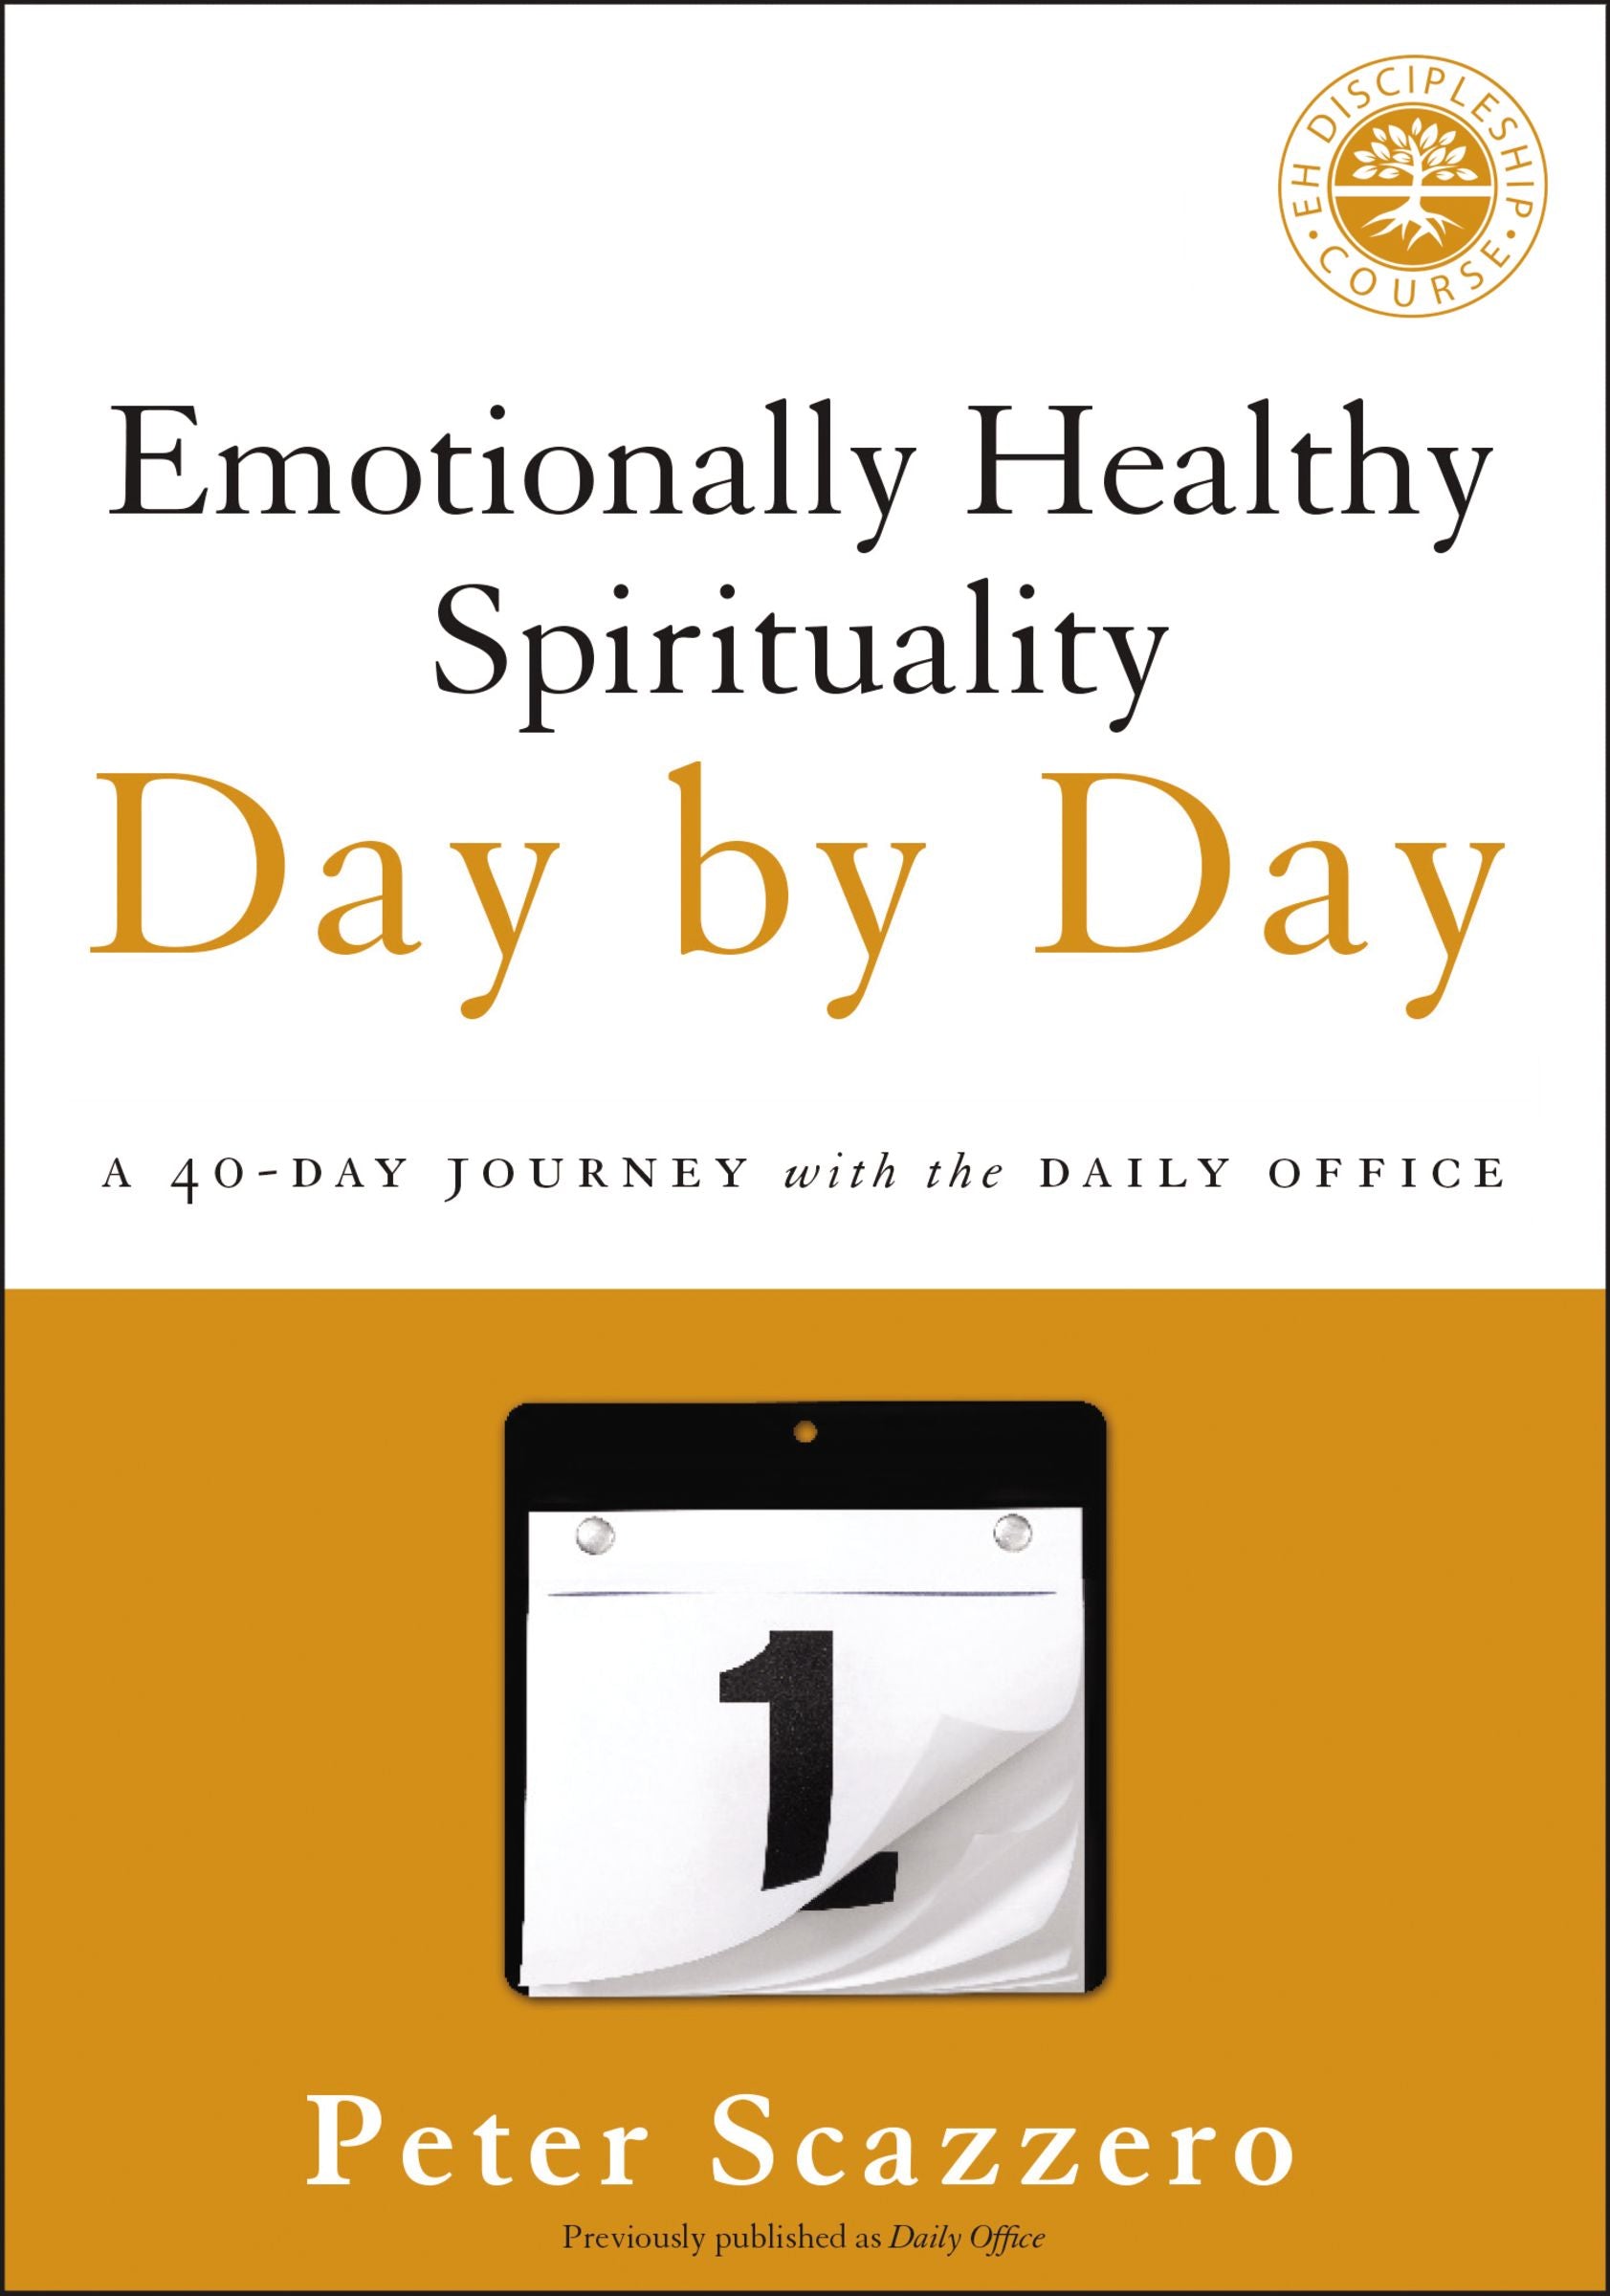 Image of Emotionally Healthy Spirituality Day by Day other